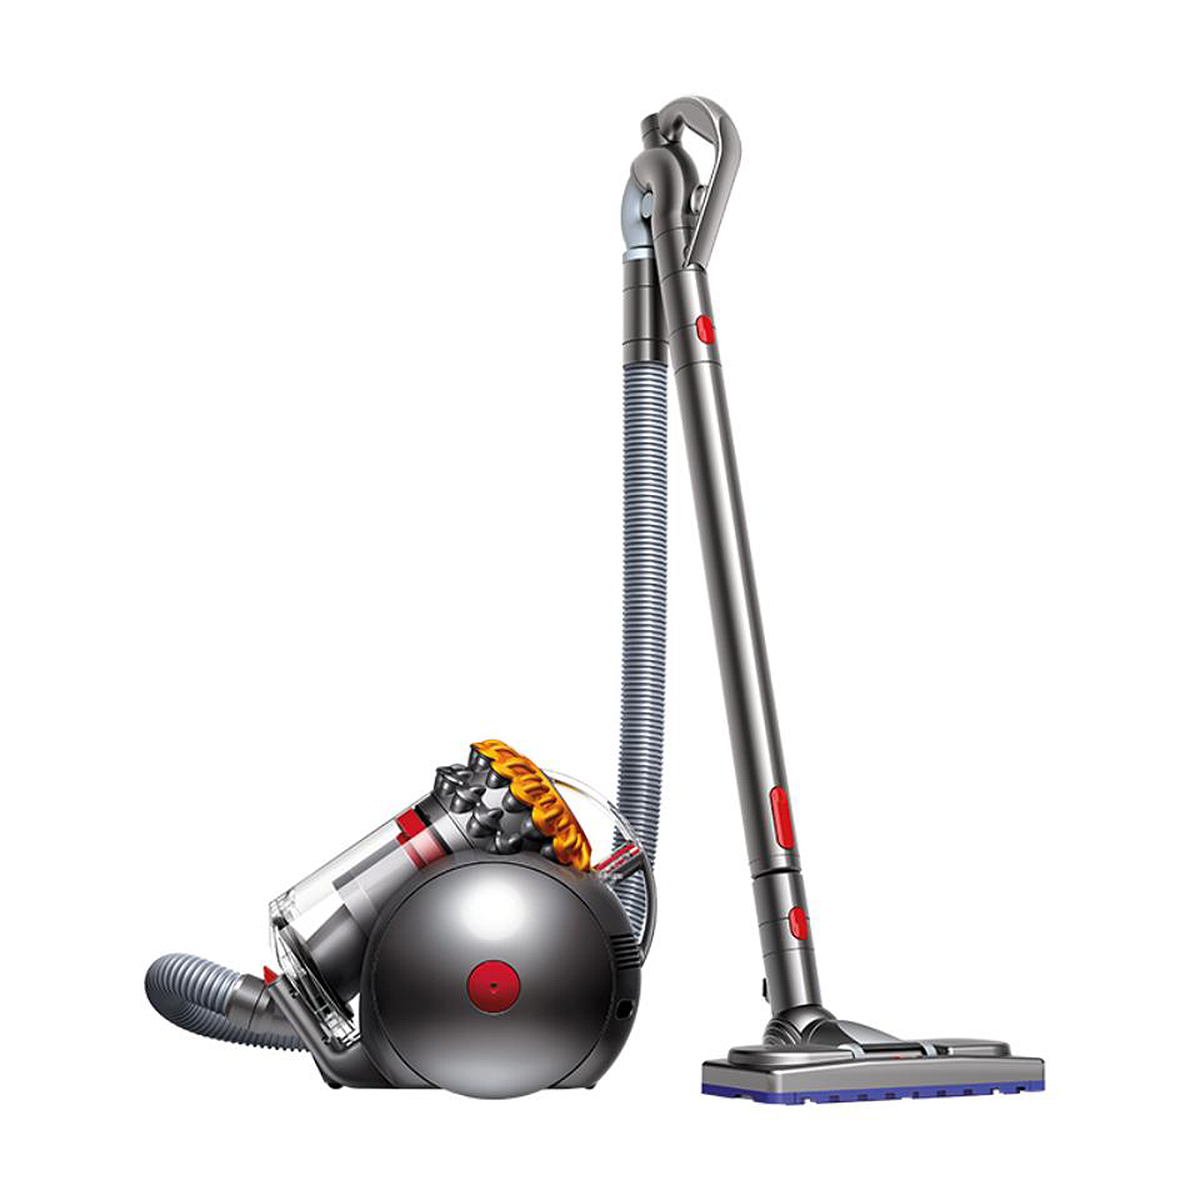 10 Major Black Friday Vacuum Deals on Dyson, Roomba and More Celeb